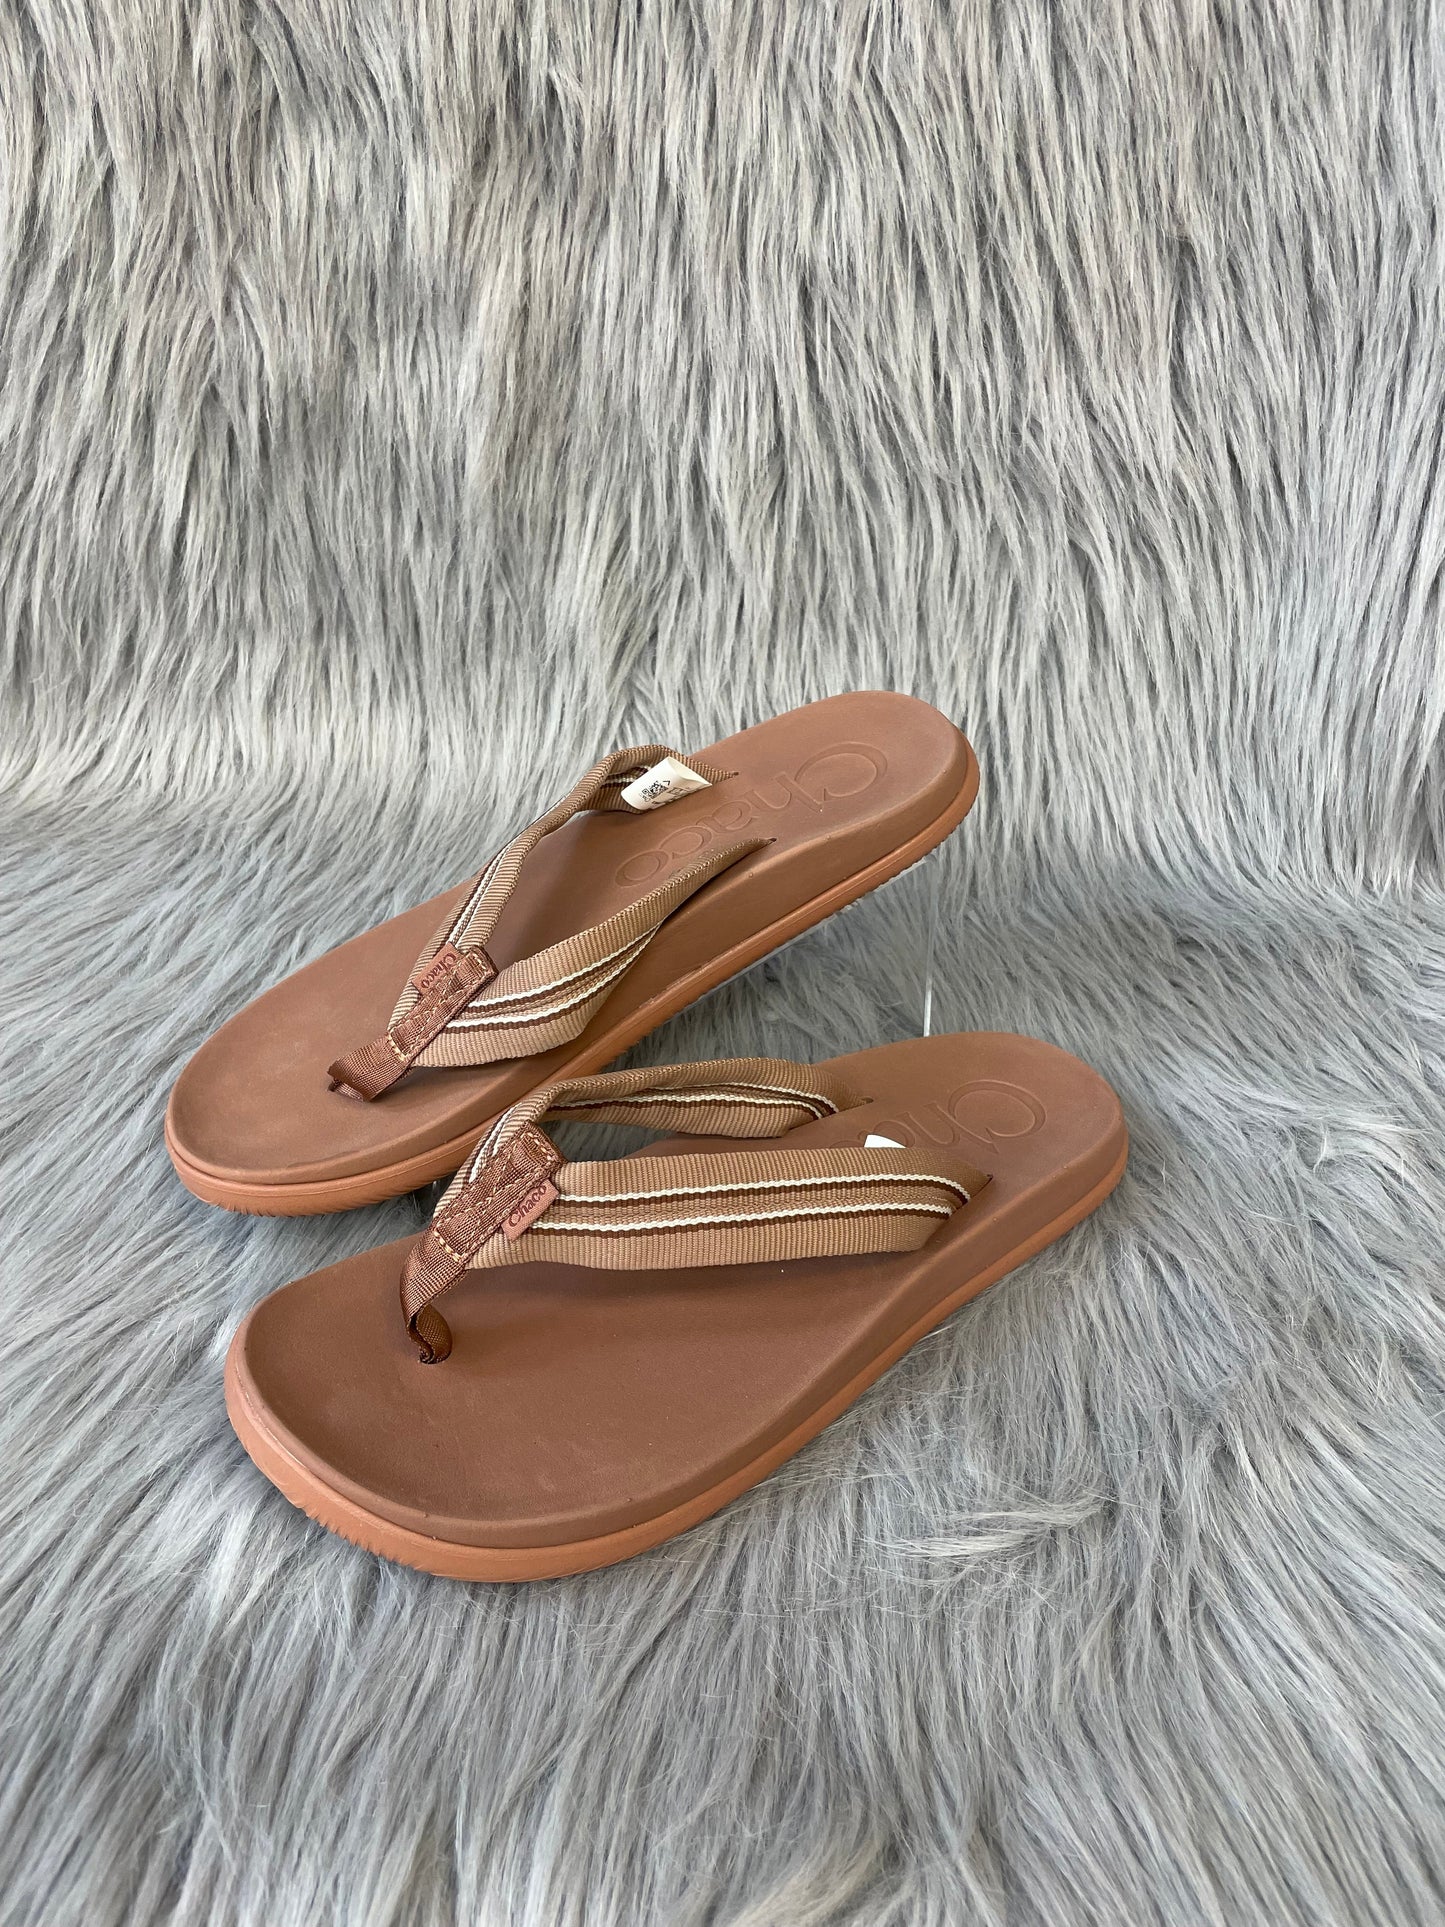 Sandals Flip Flops By Chacos  Size: 9